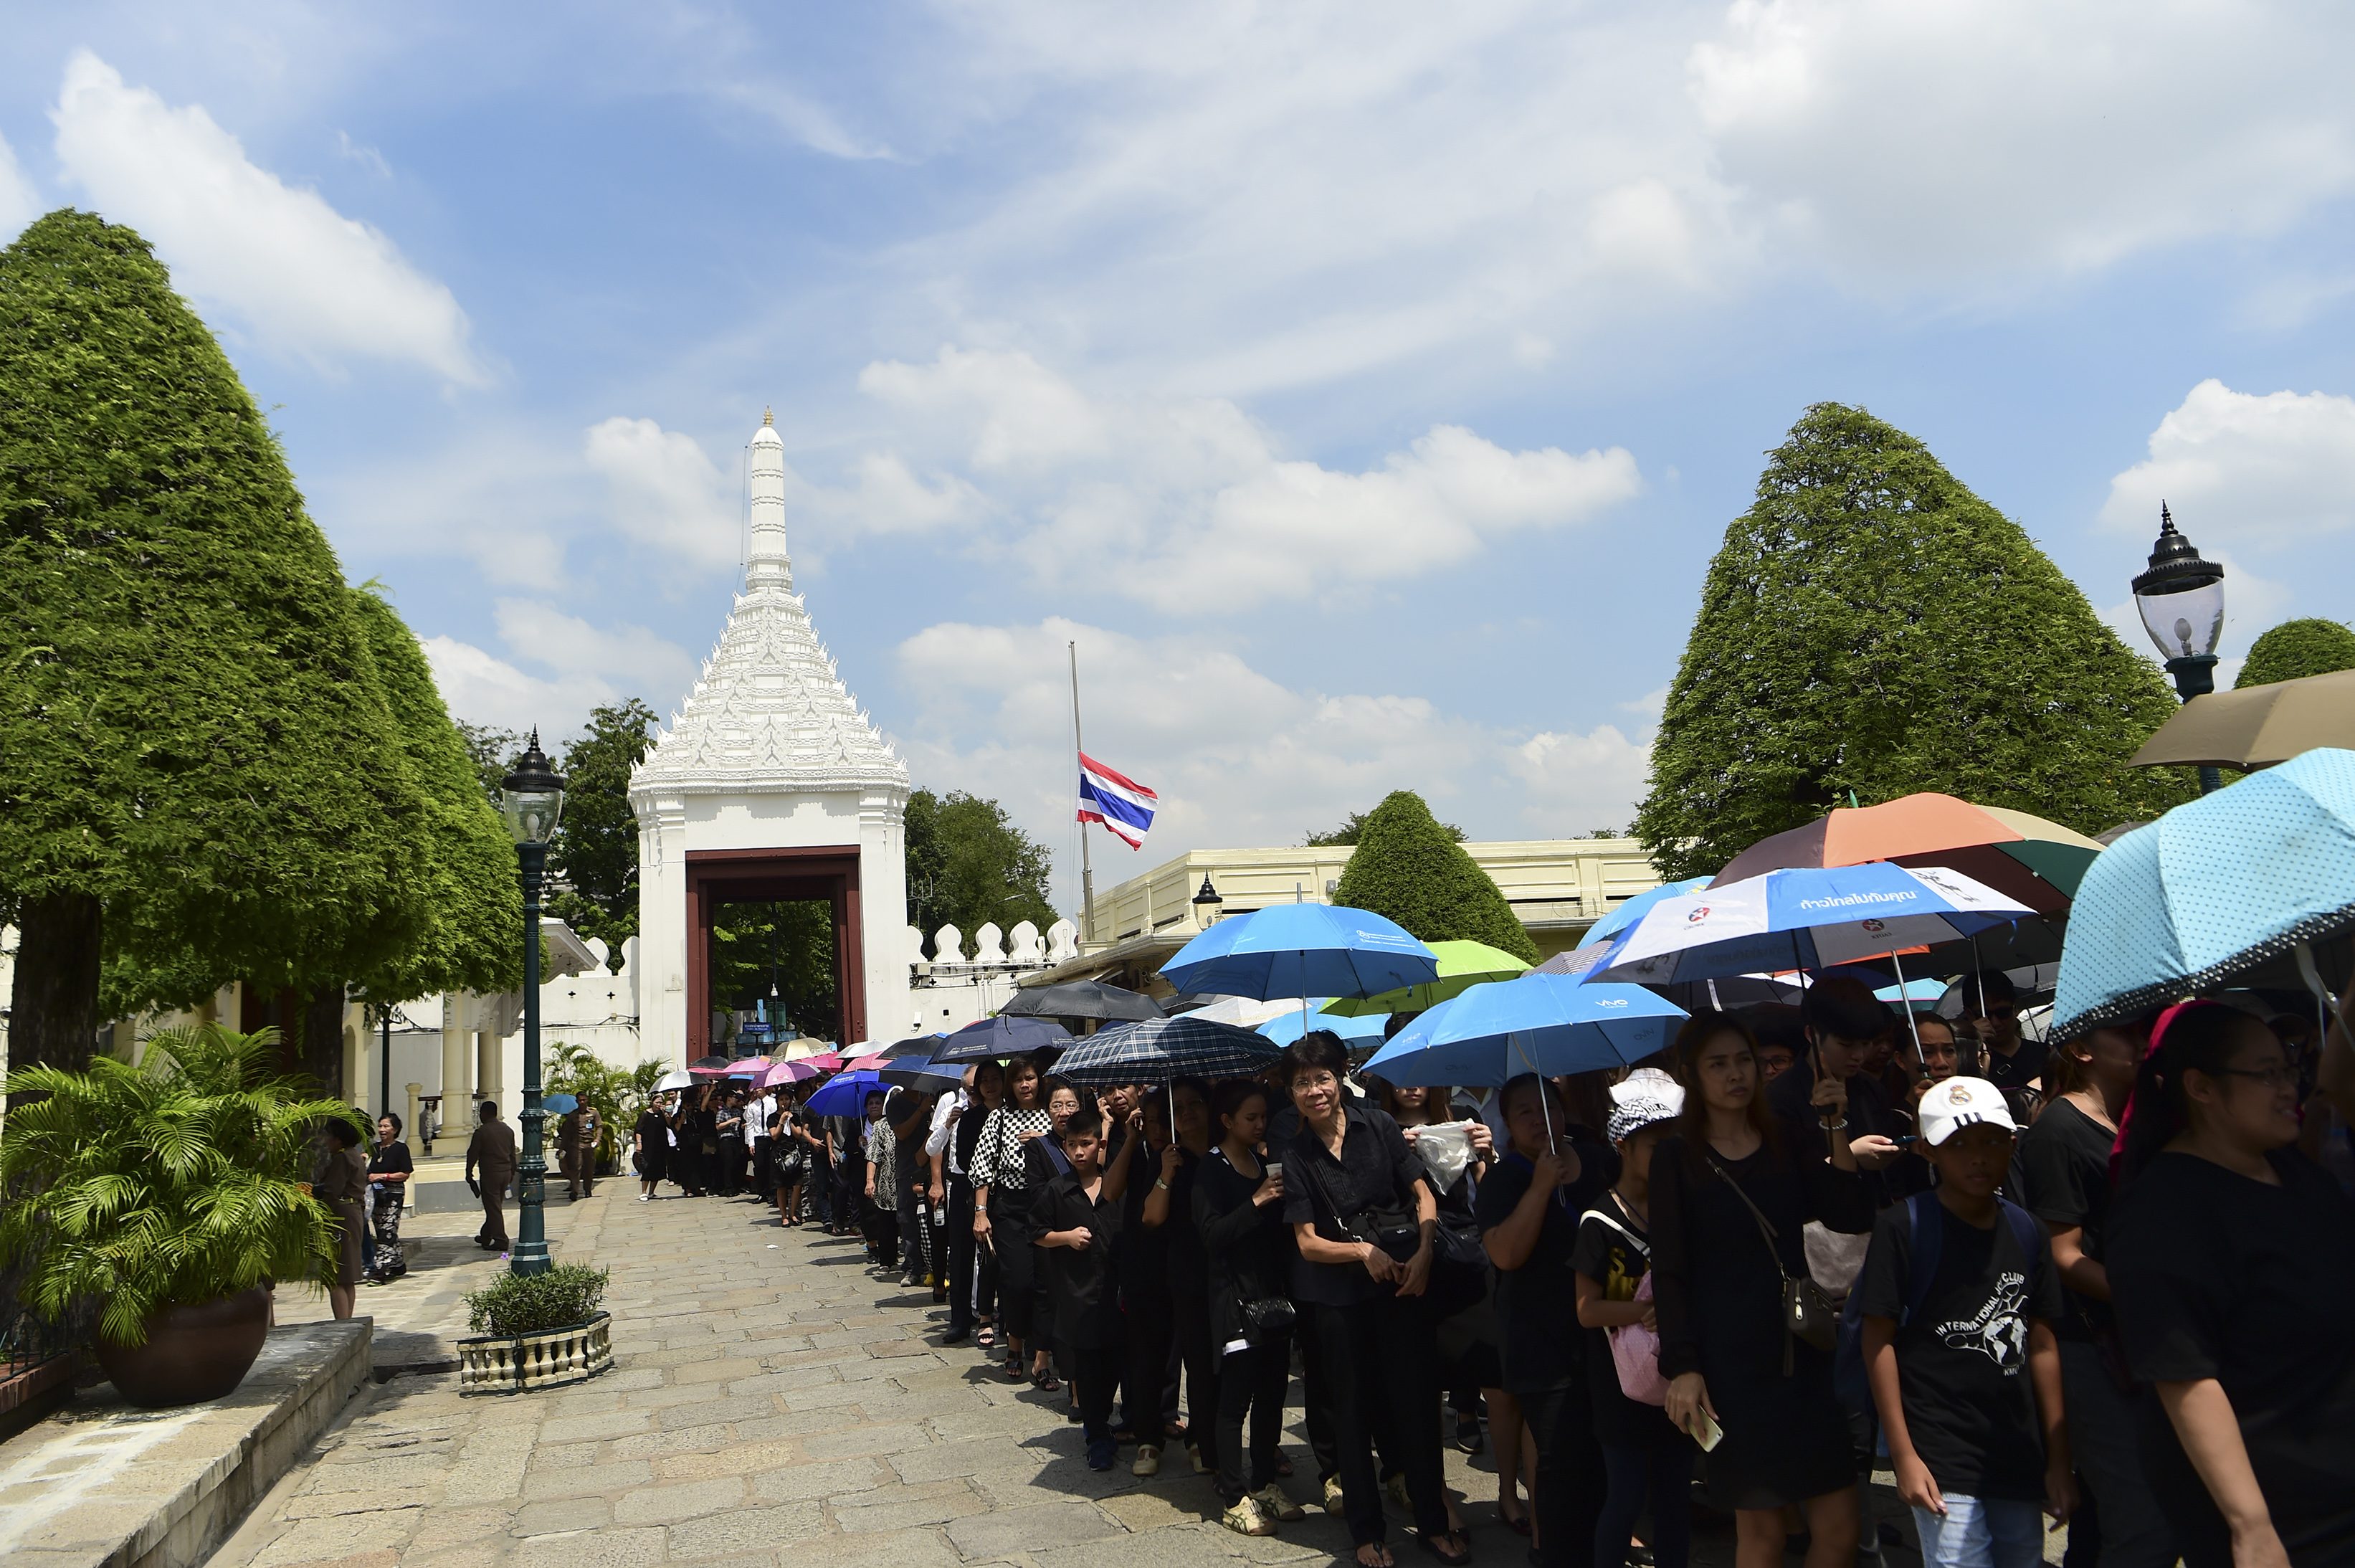 People line up to pay their respects to the late Thai King Bhumibol Adulyadej at the Grand Palace in Bangkok on October 14, 2016. Bhumibol, the world's longest-reigning monarch, passed away aged 88 on October 13, 2016 after years of ill health, removing a stabilising father figure from a country where political tensions remain two years after a military coup. / AFP PHOTO / MUNIR UZ ZAMAN